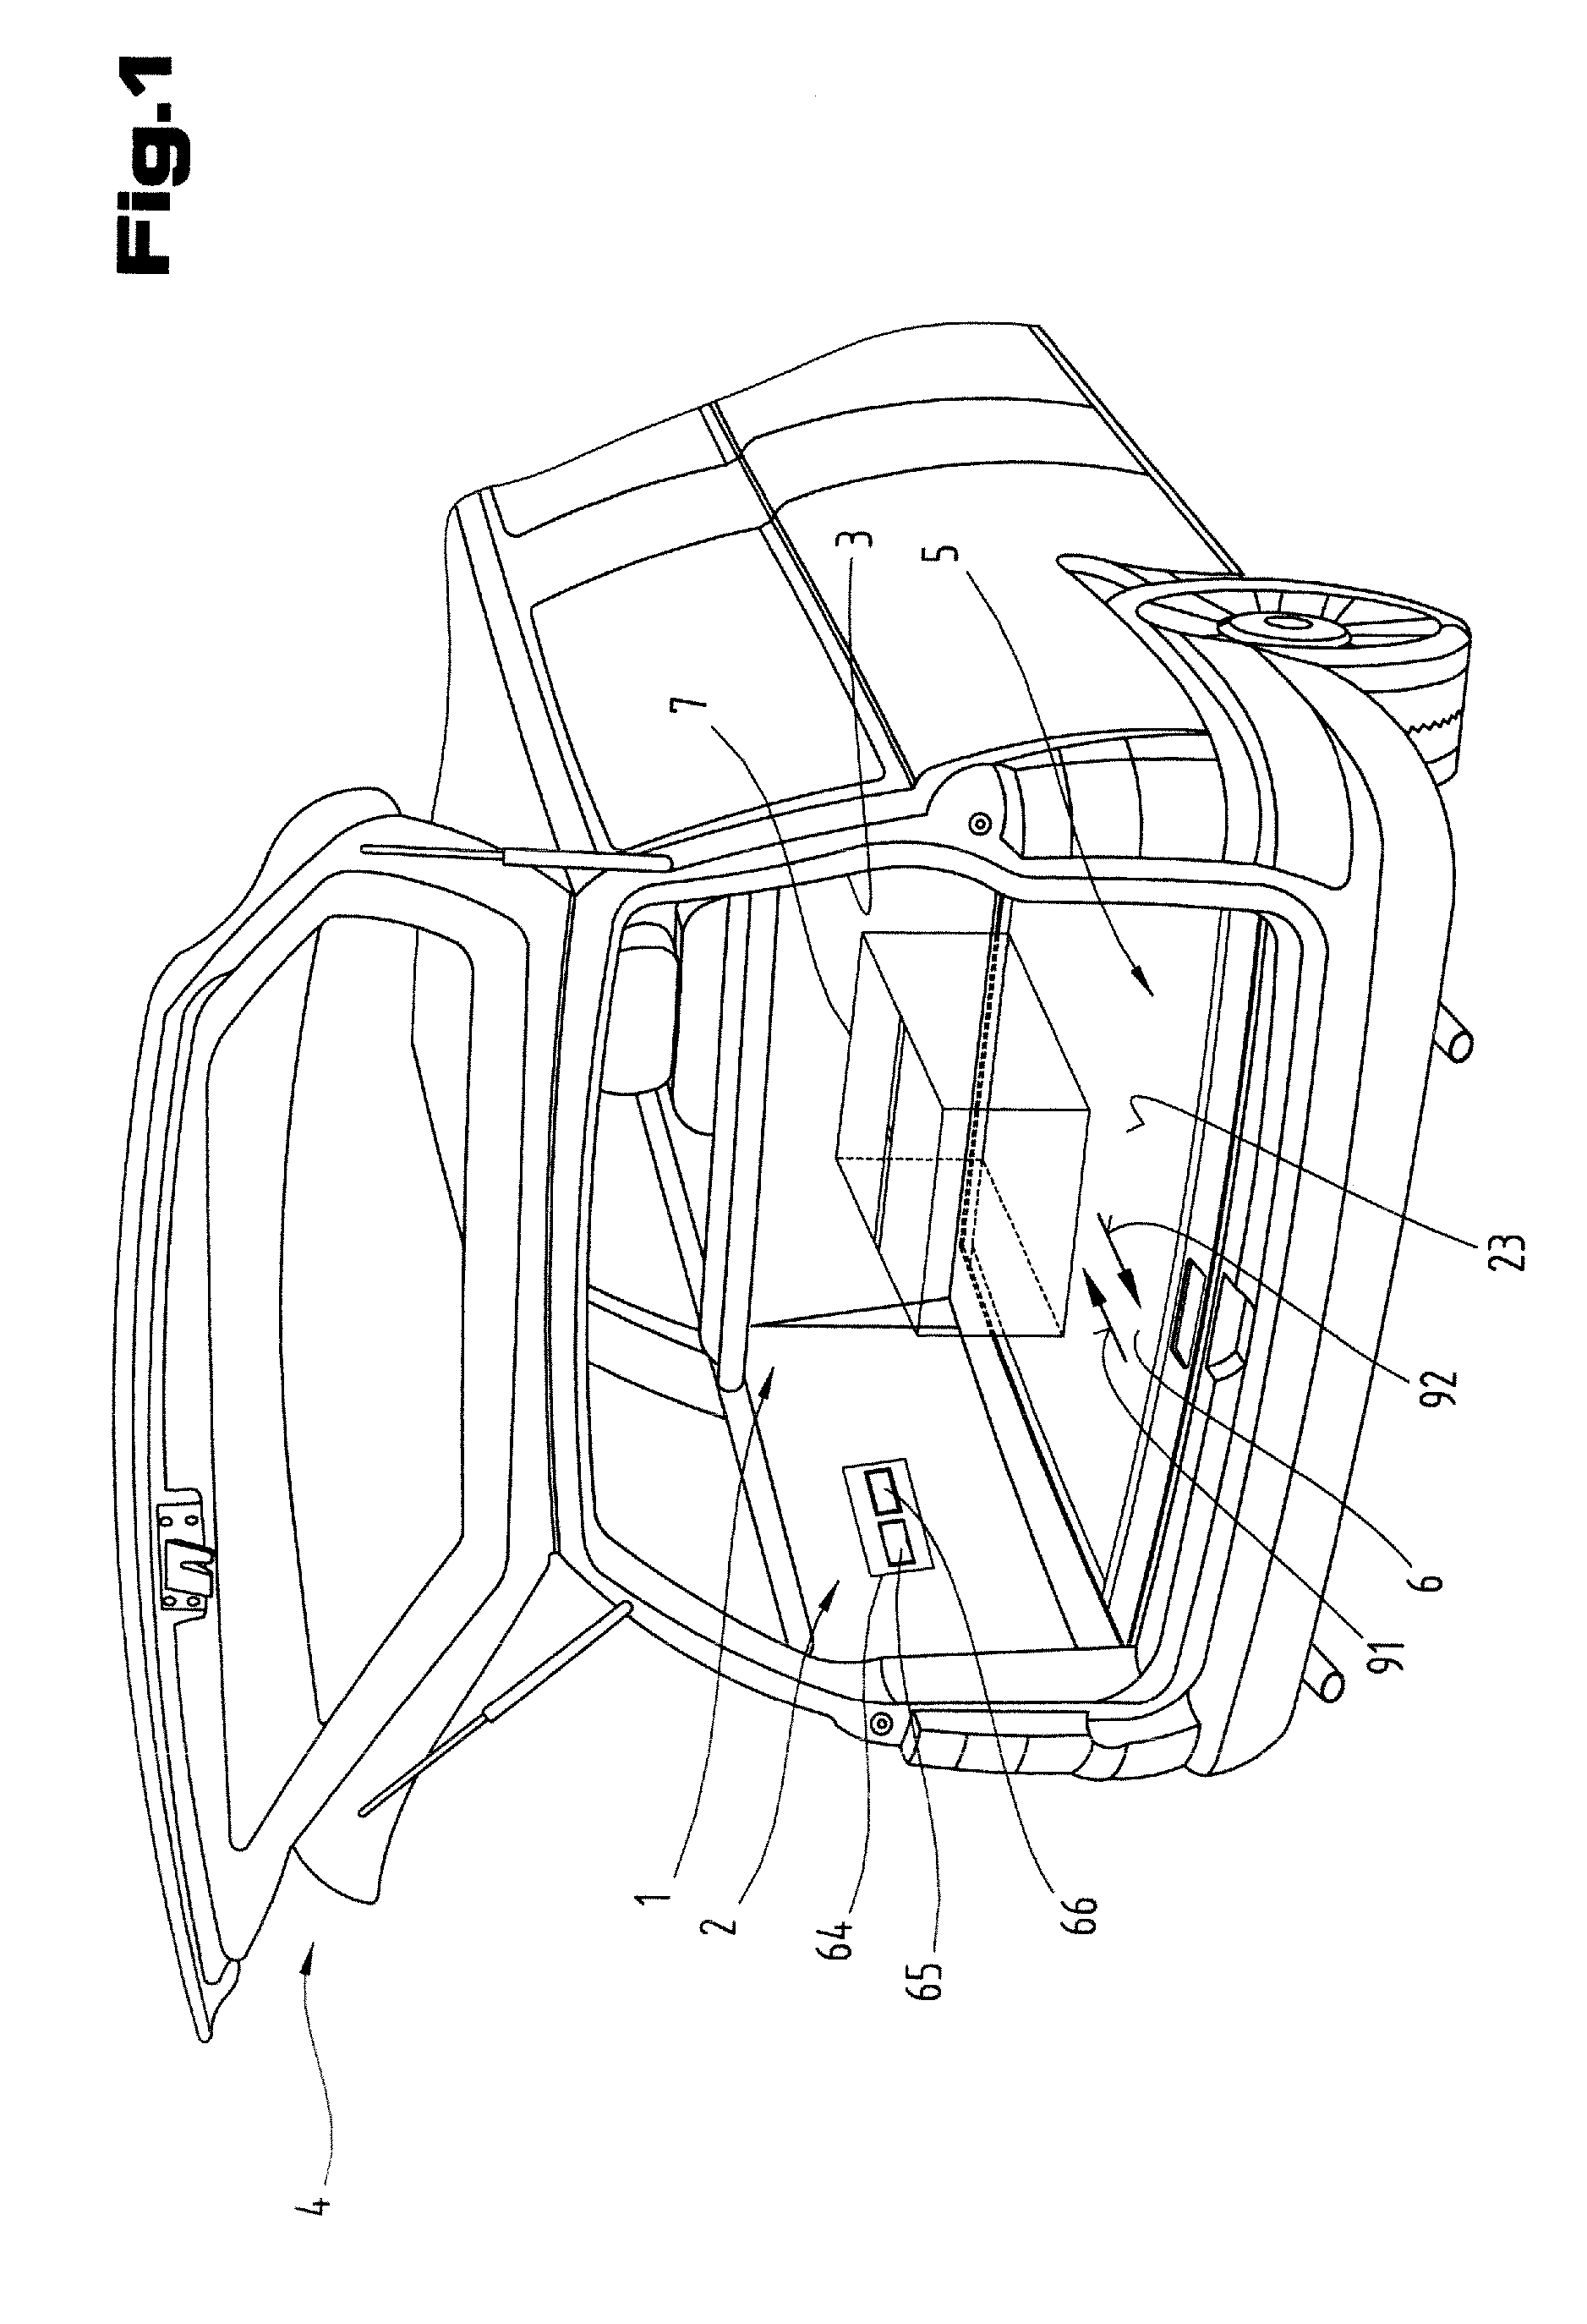 Loading Compartment Floor for a Loading Compartment of a Motor Vehicle